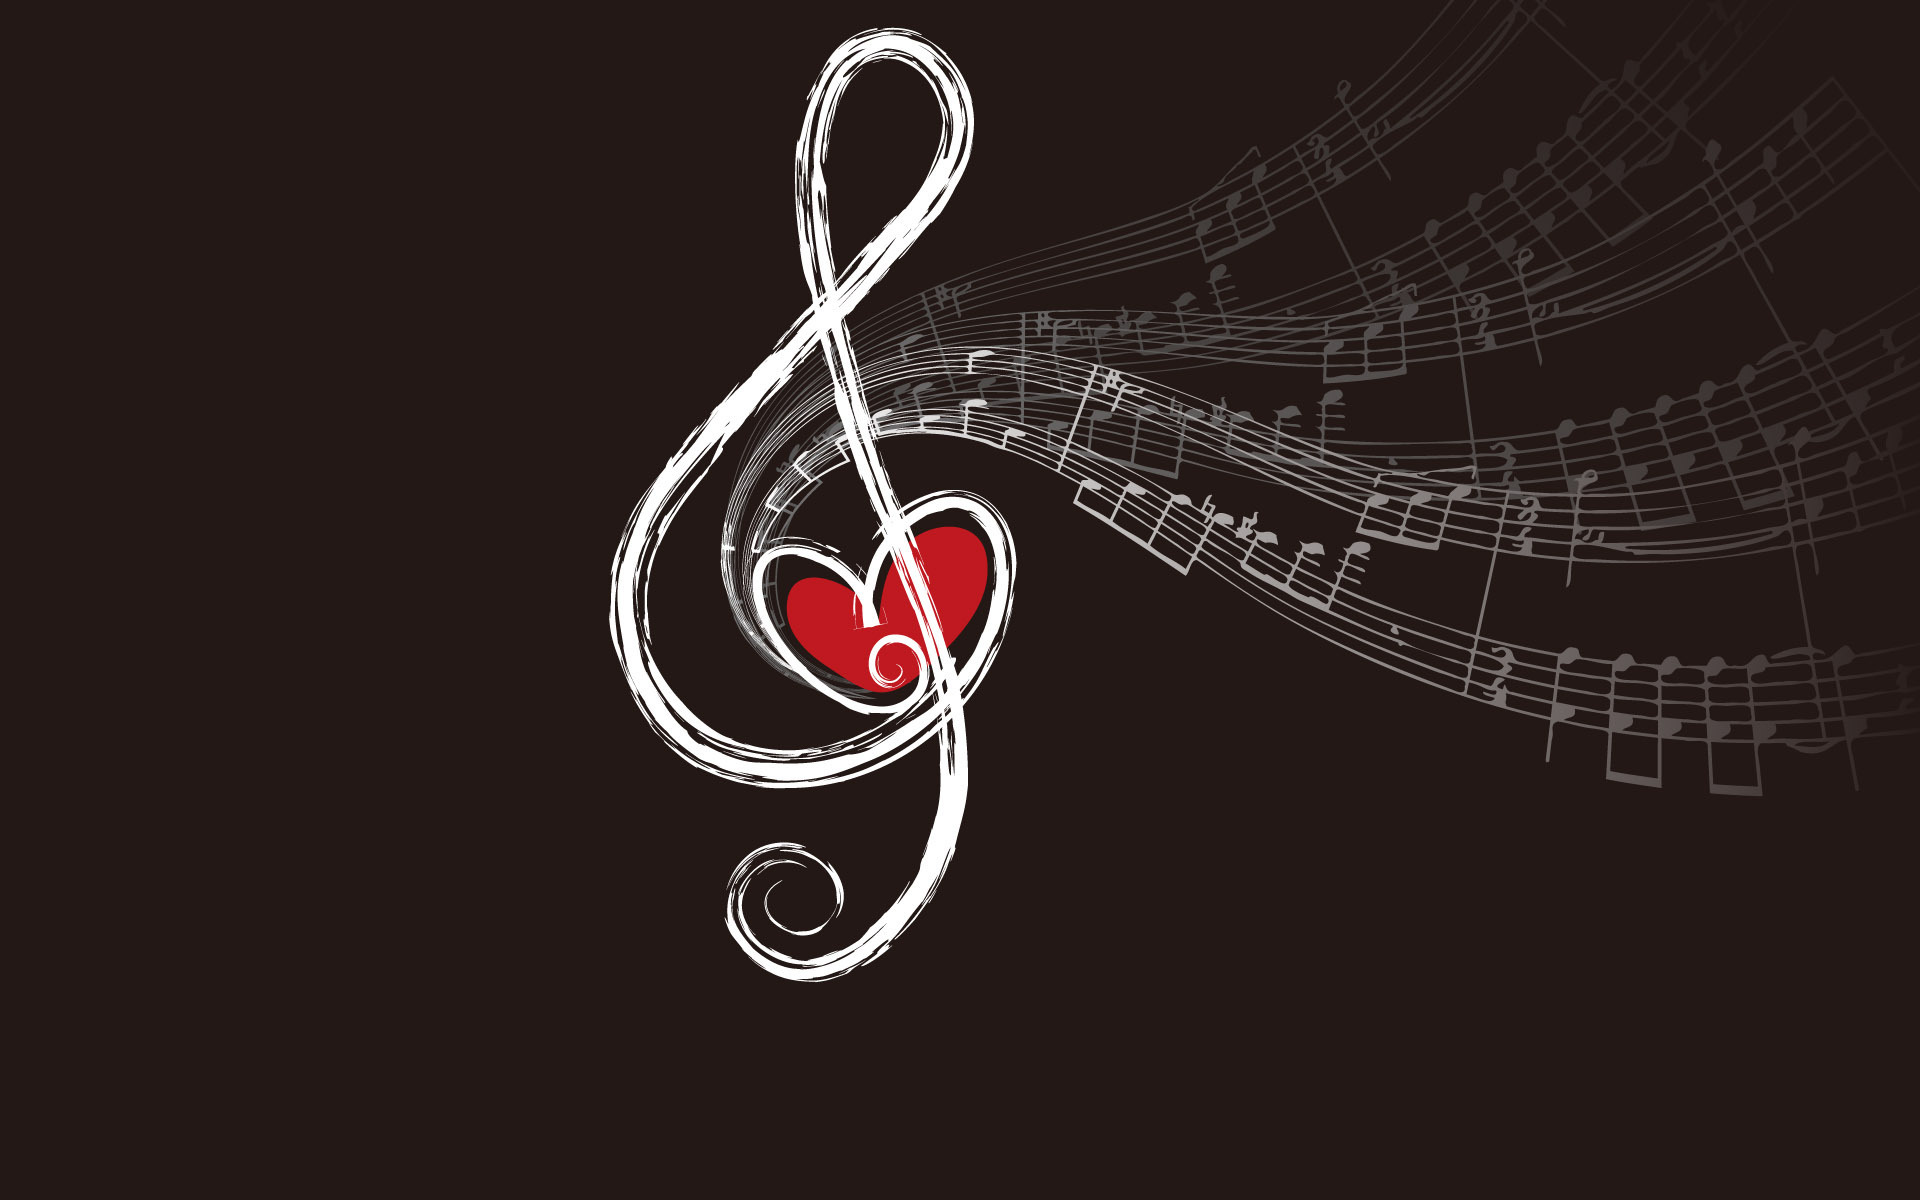 backgrounds-music-sheet-background-violin-powerpoint-wallpapers-hd ...